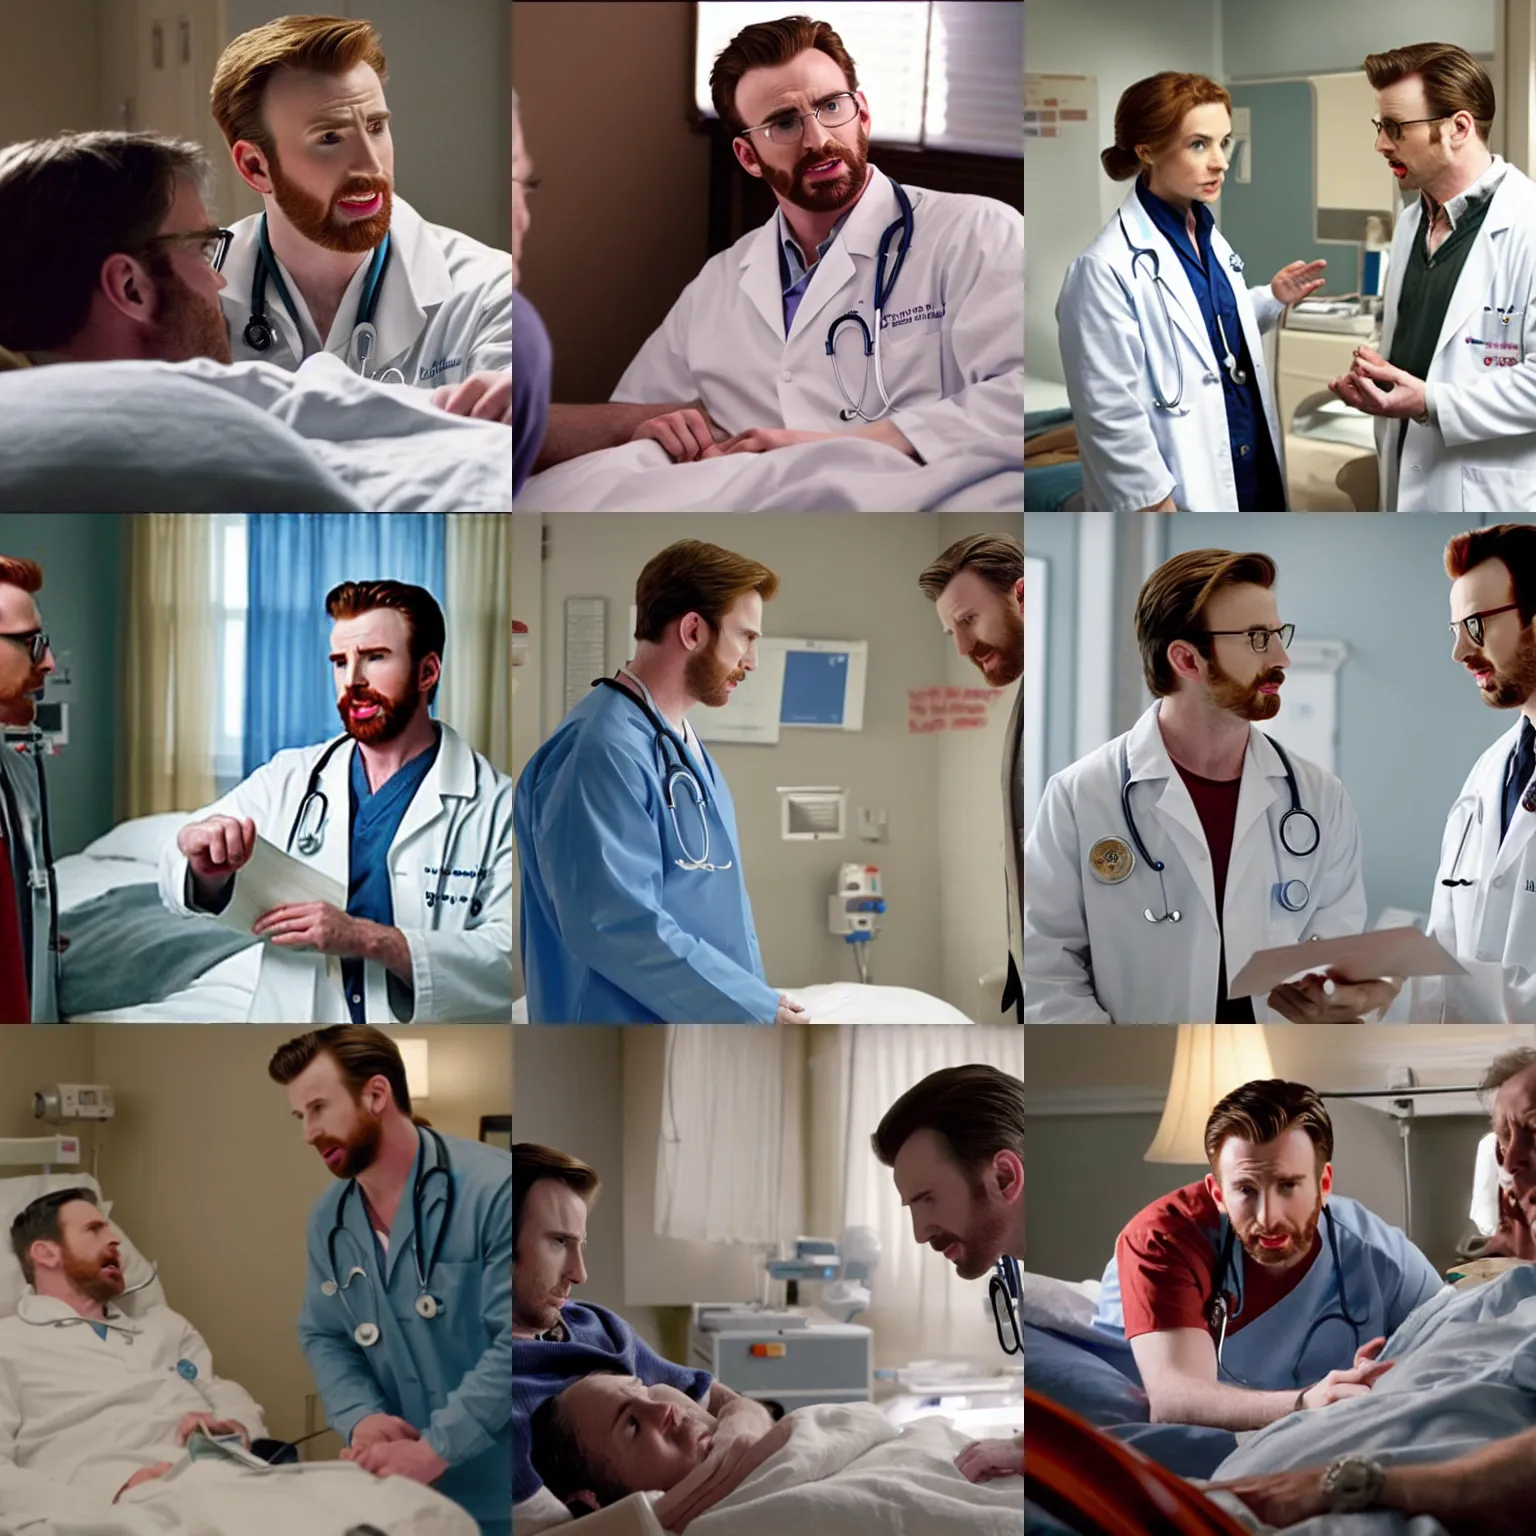 Prompt: a movie scene featuring Chris Evans as a doctor talking with a sick patient in bed who is Chris Evans, a nurse who is Chris Evans stands nearby with a chart, directed by Stephen Spielberg